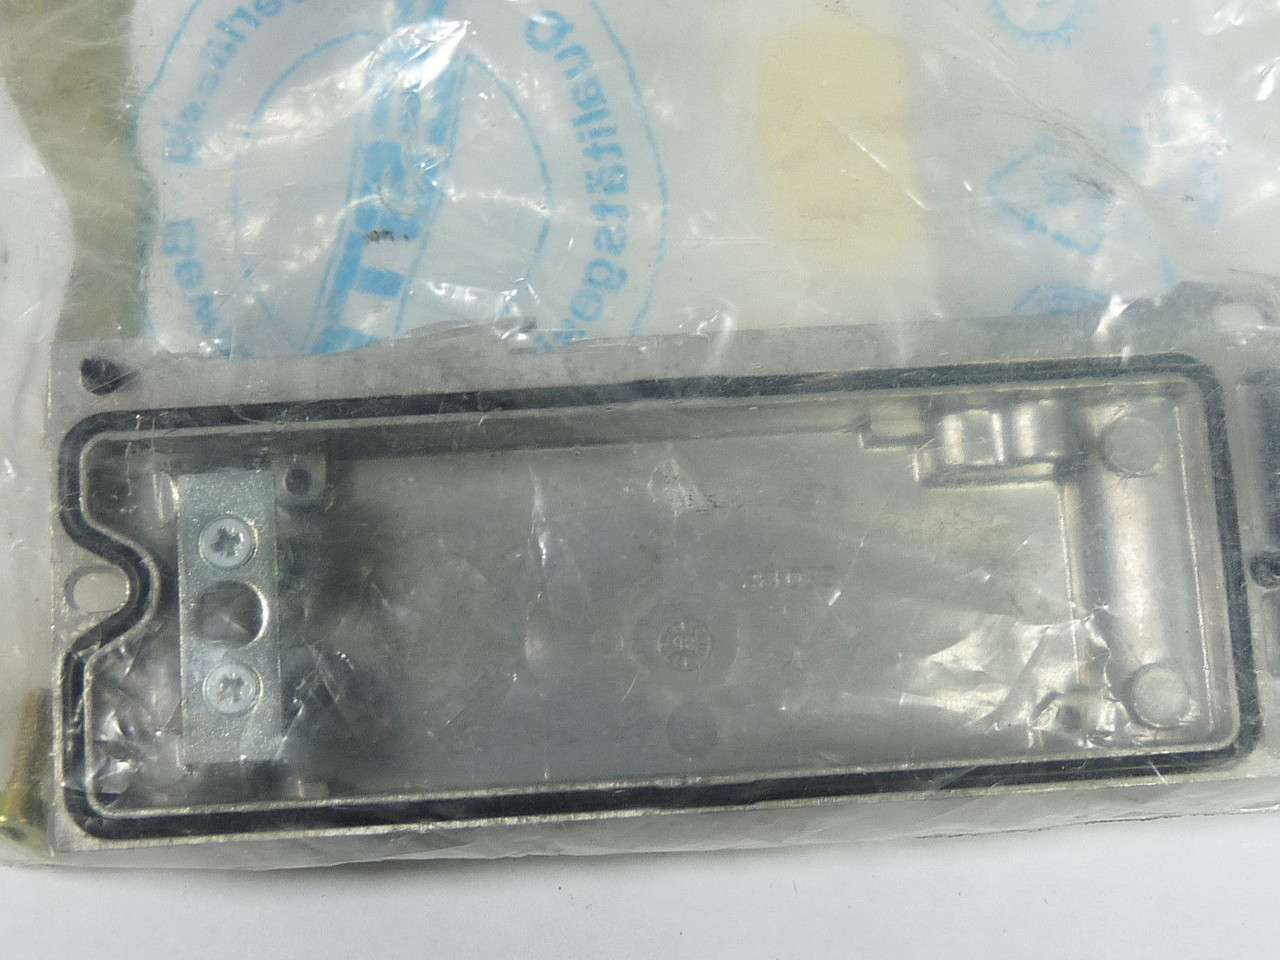 Festo 18639 IEPL-03-FB Input/Output End Plate ! NEW !